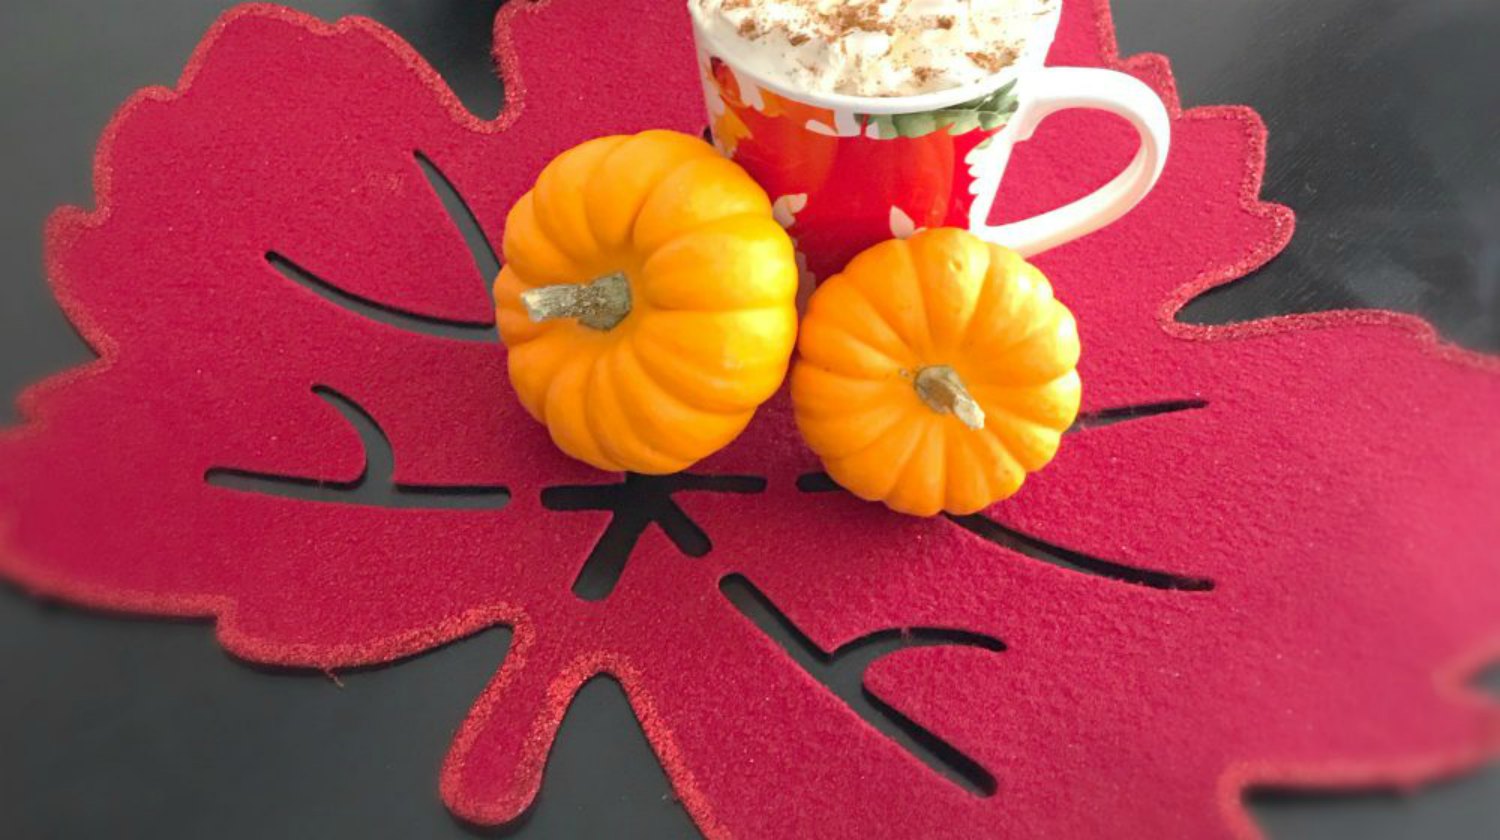 pumpkin spice latte on fall leaf placemat | DIY Placemat Ideas To Make Your Thanksgiving Table Stand Out | Placemat Ideas | homemade placemats ideas | Featured